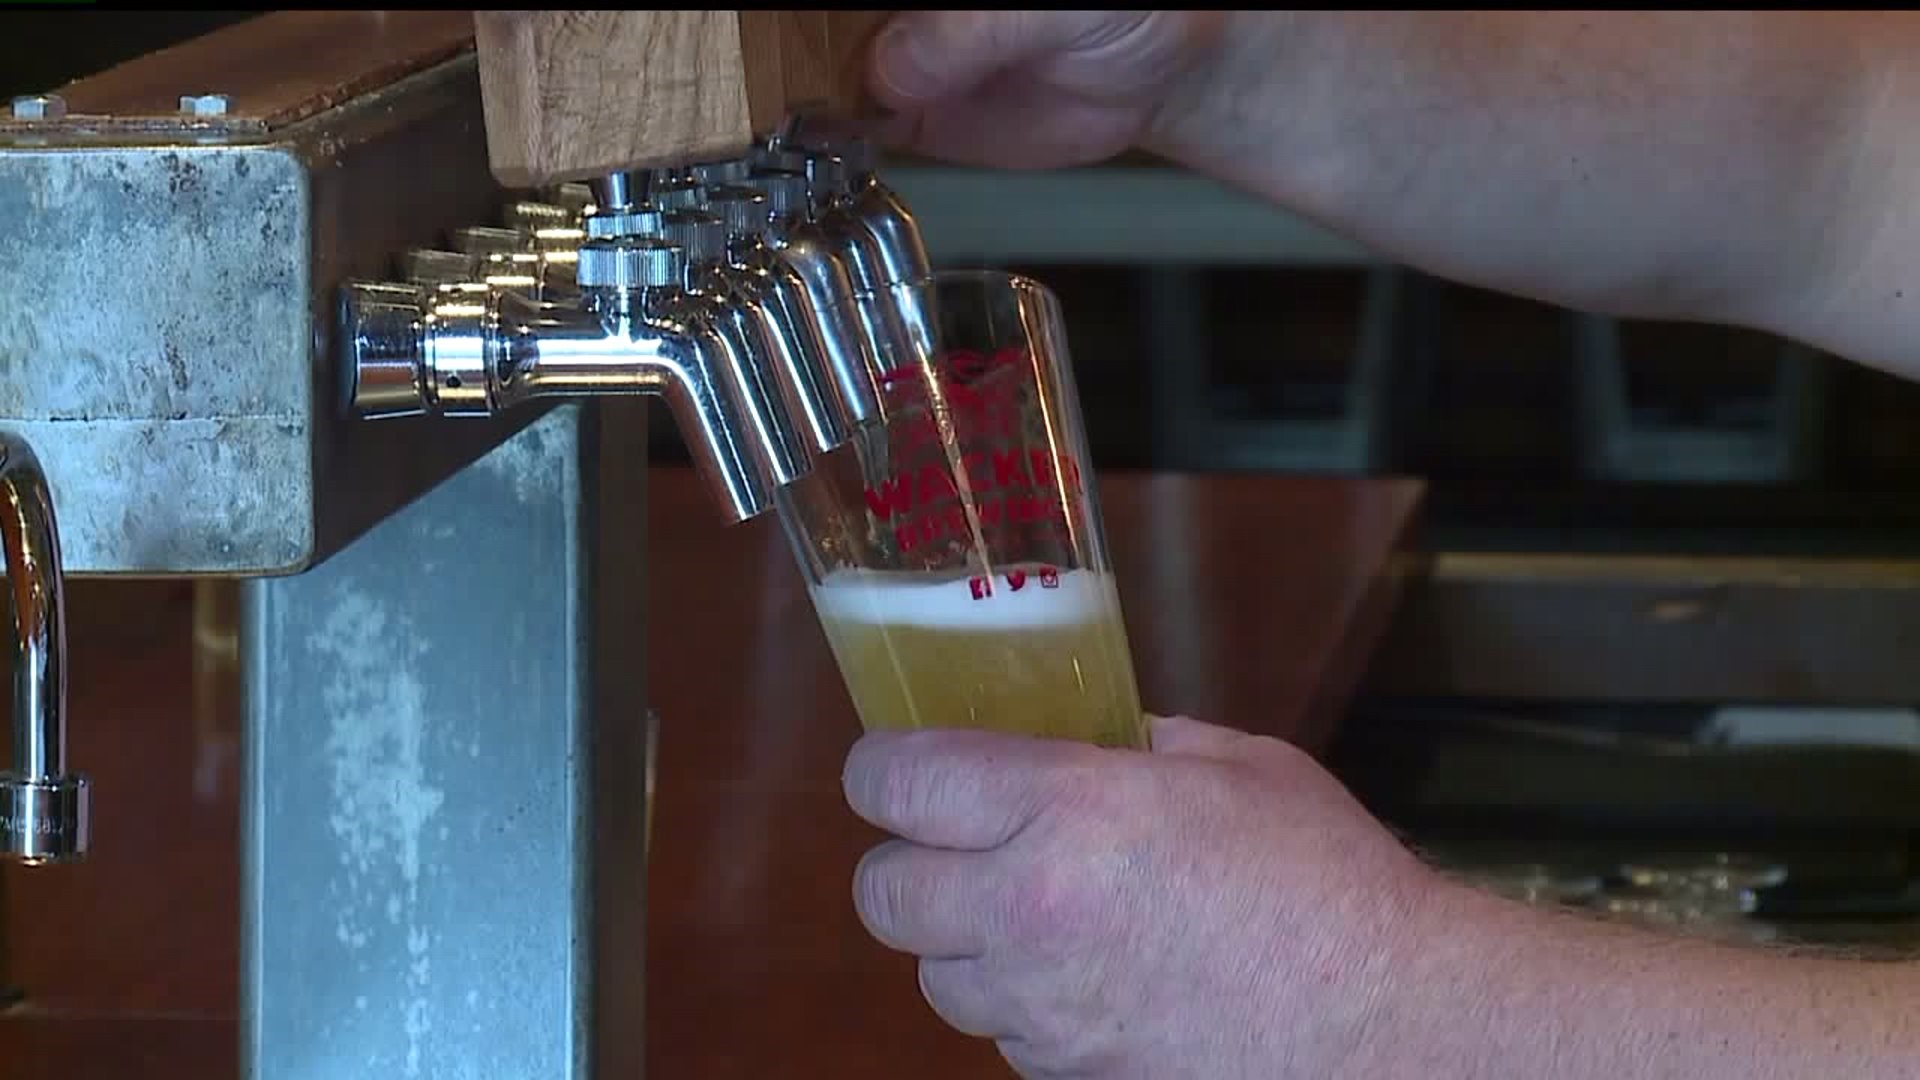 Funding promotes PA brewing industry